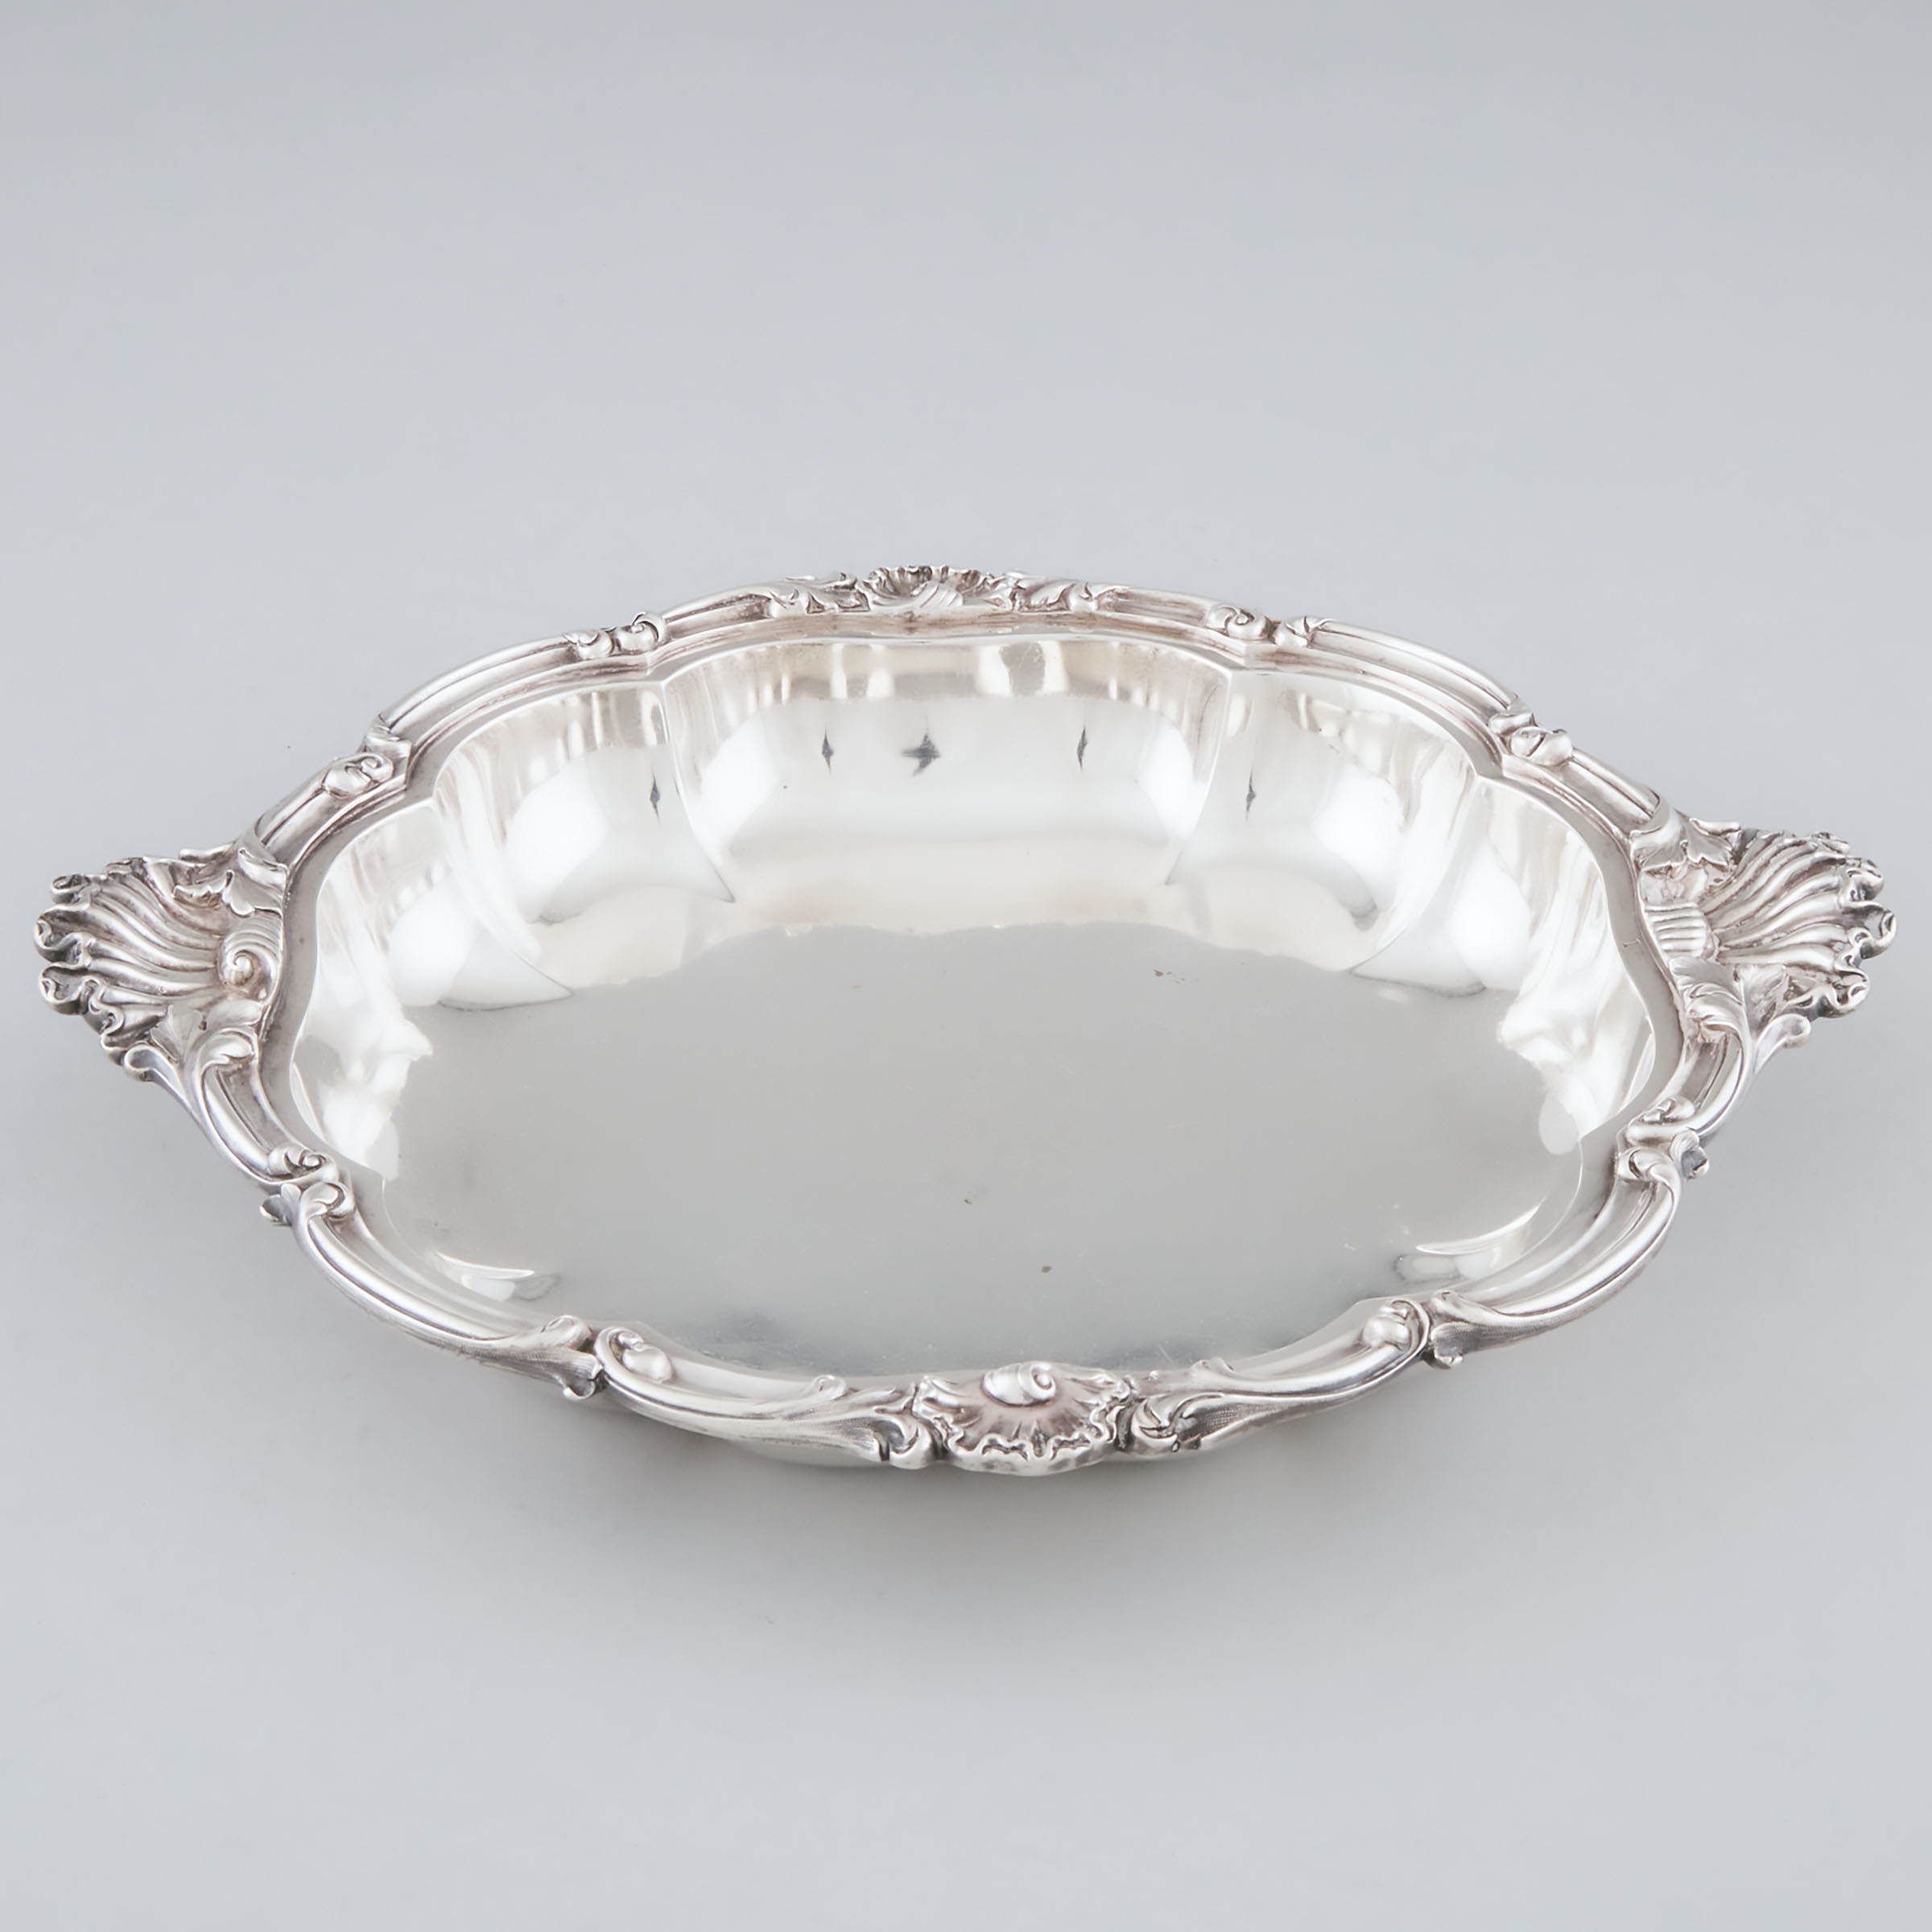 William IV Silver Two-Handled Serving Dish, Paul Storr, London, 1836